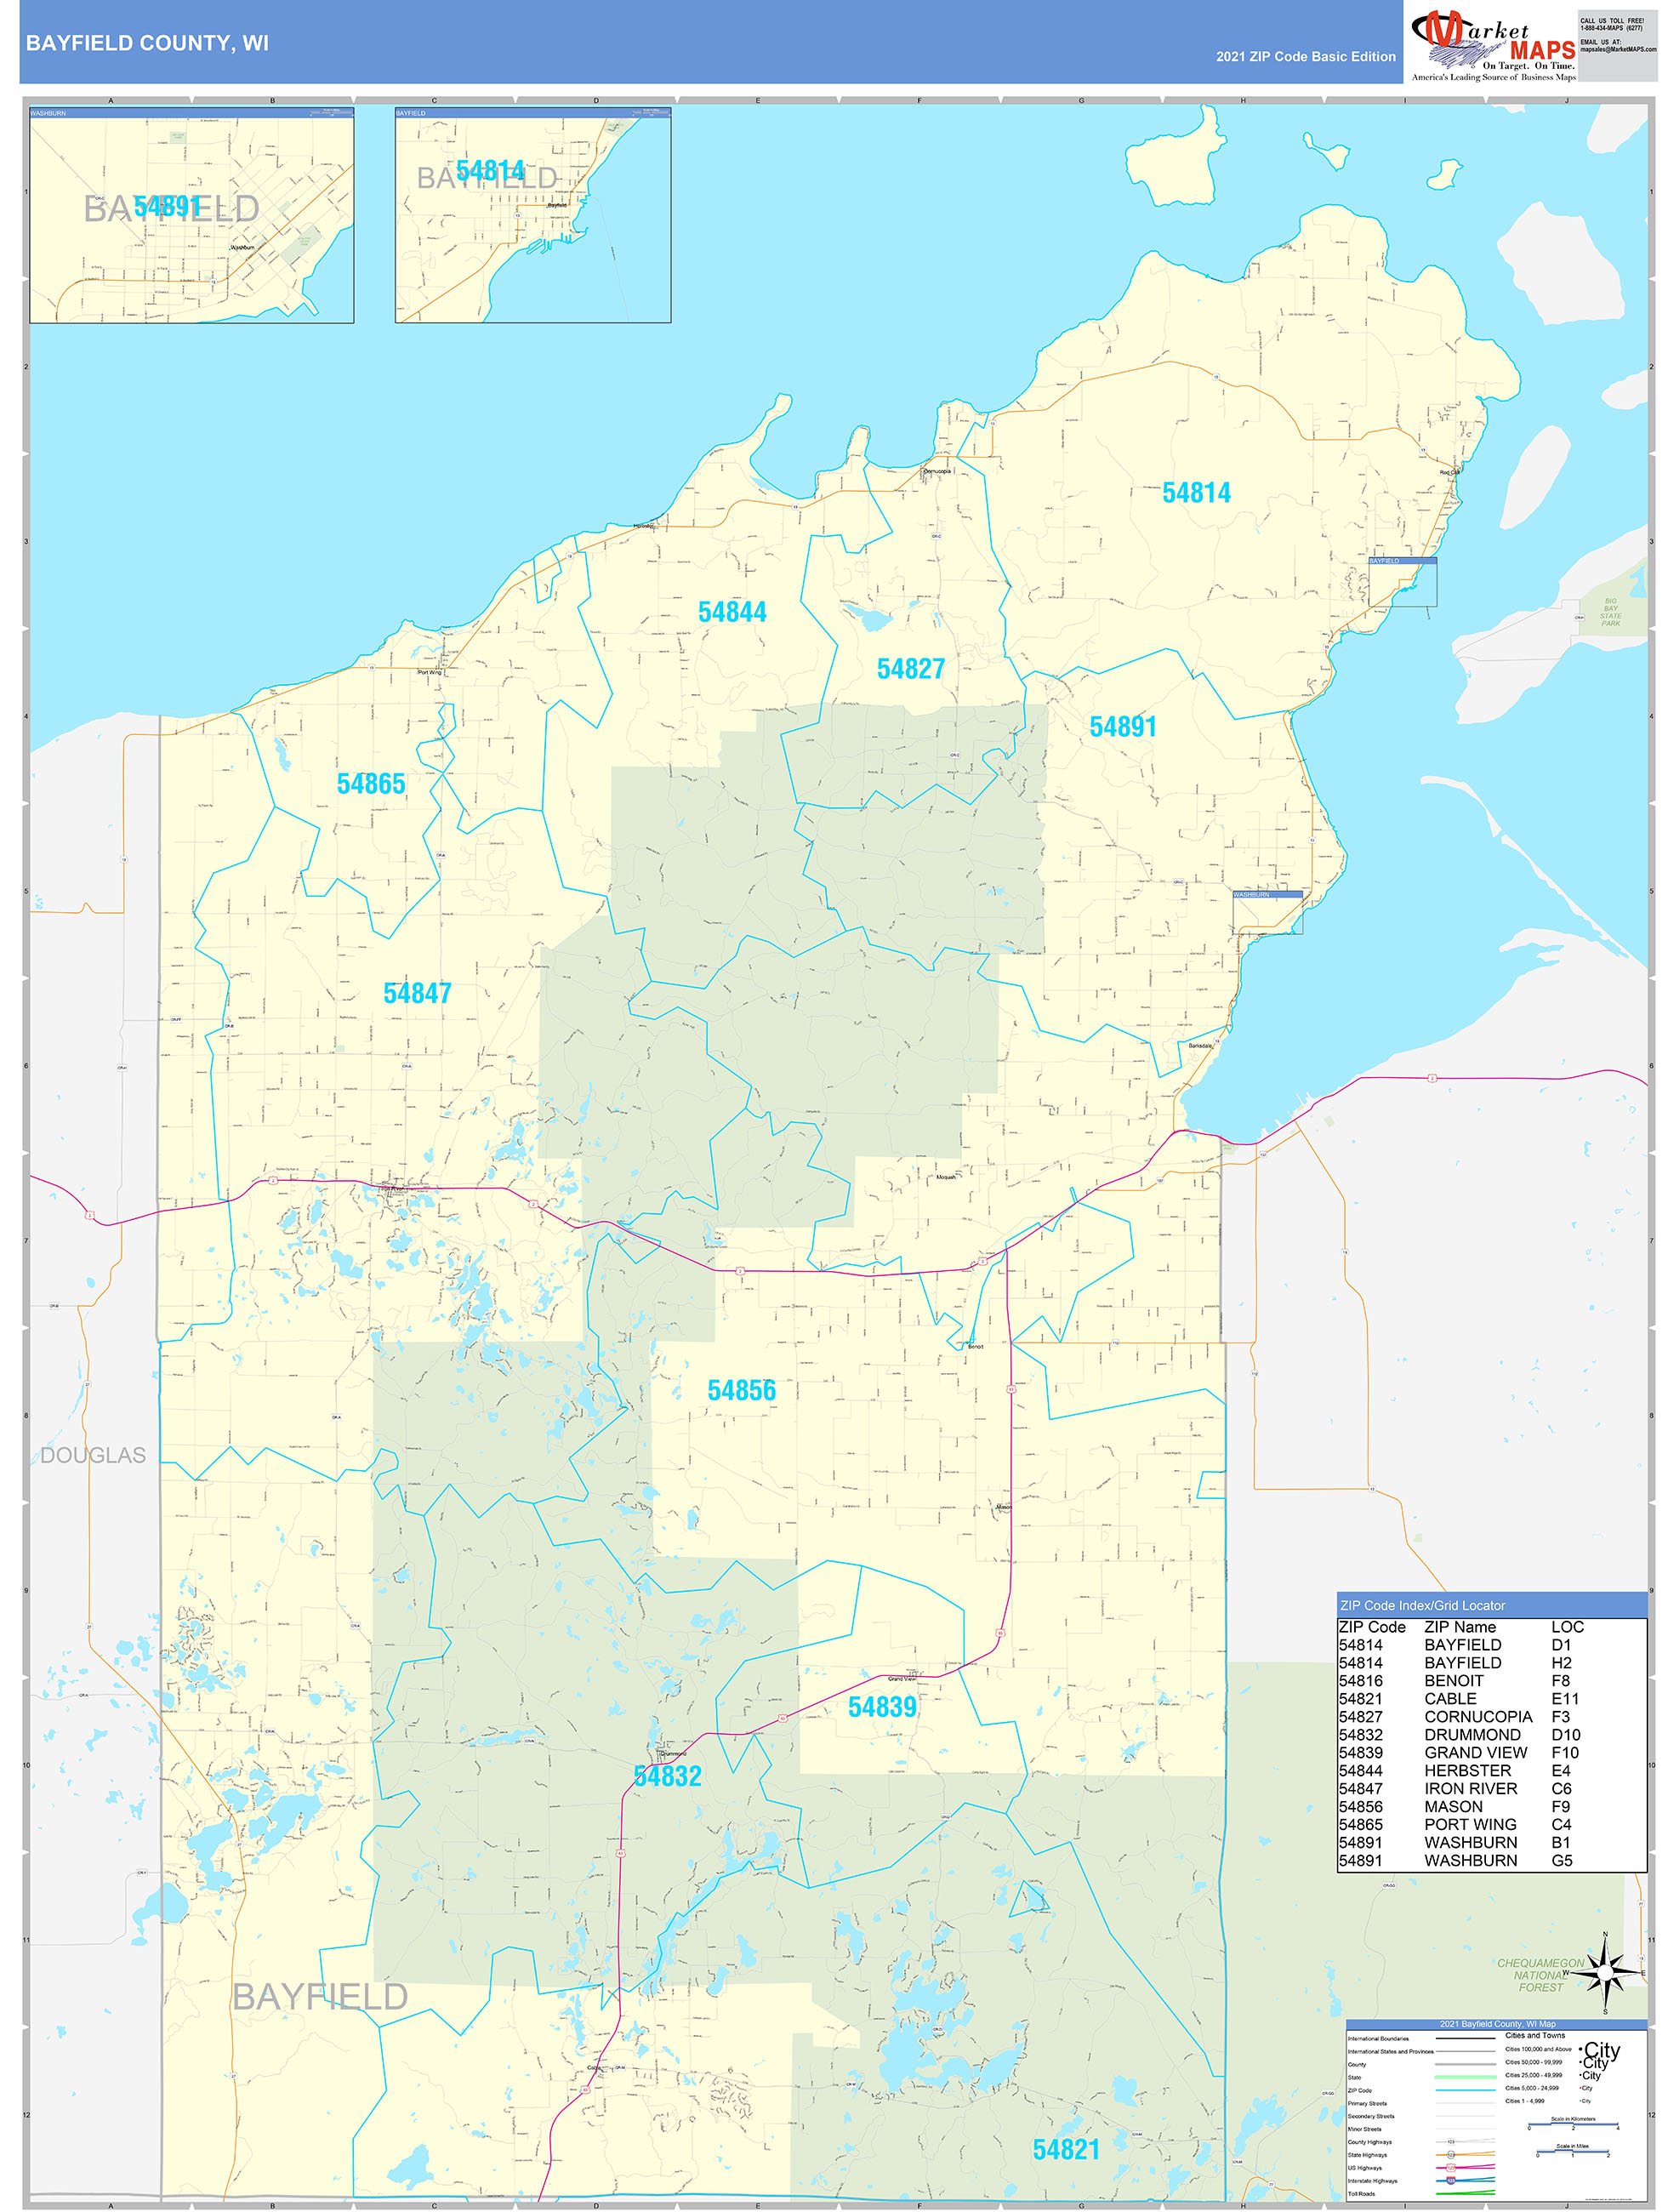 Bayfield County Wi Zip Code Wall Map Basic Style By Marketmaps